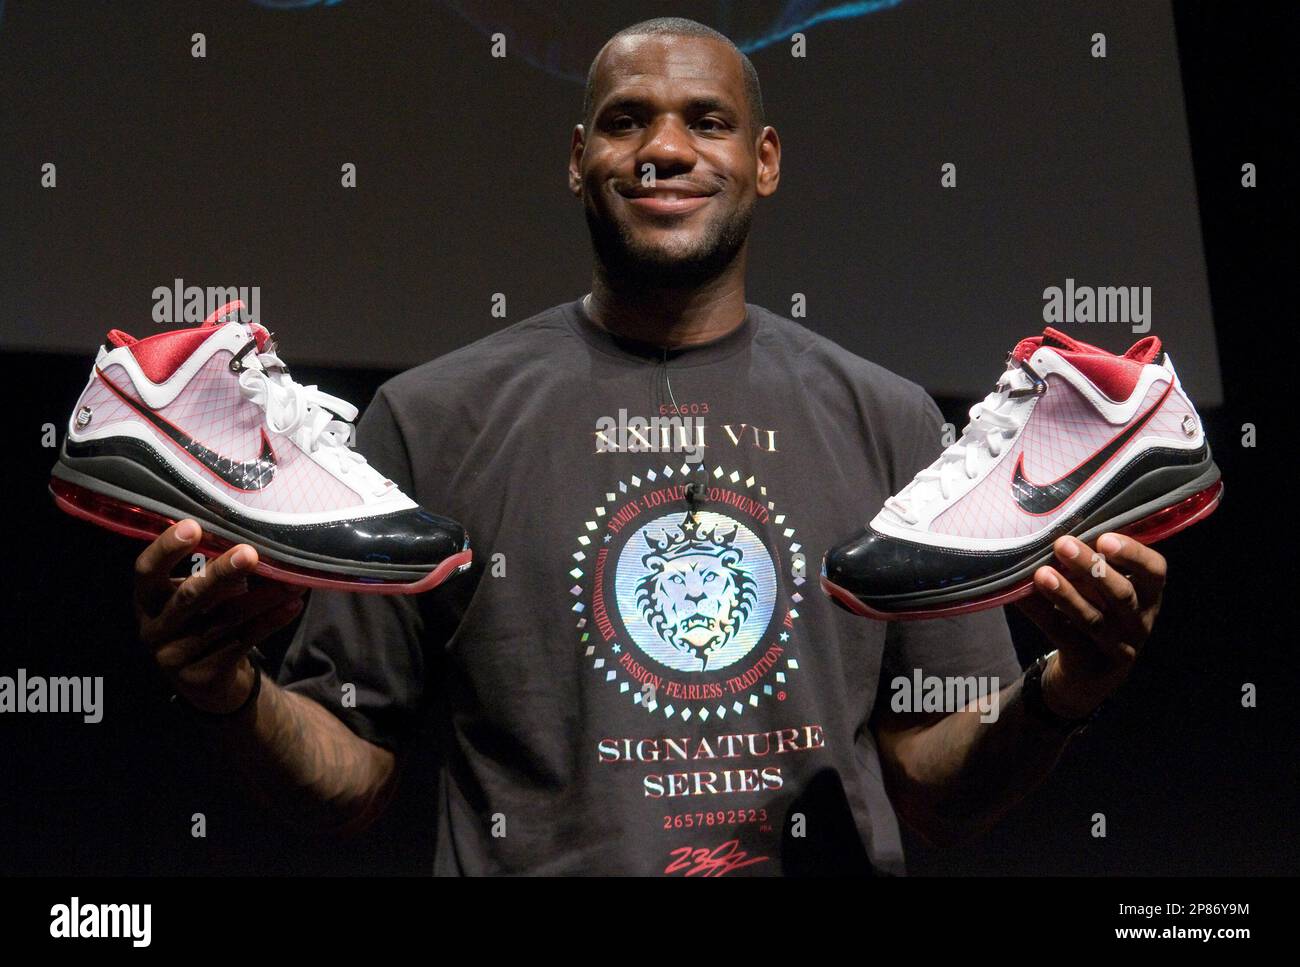 Cleveland Cavalier forward LeBron James reveals his new Nike Air Max LeBron  VII shoes during an event at Ed Davis Community Center in Akron, Ohio on  Friday, Aug. 7, 2009 in Cleveland,